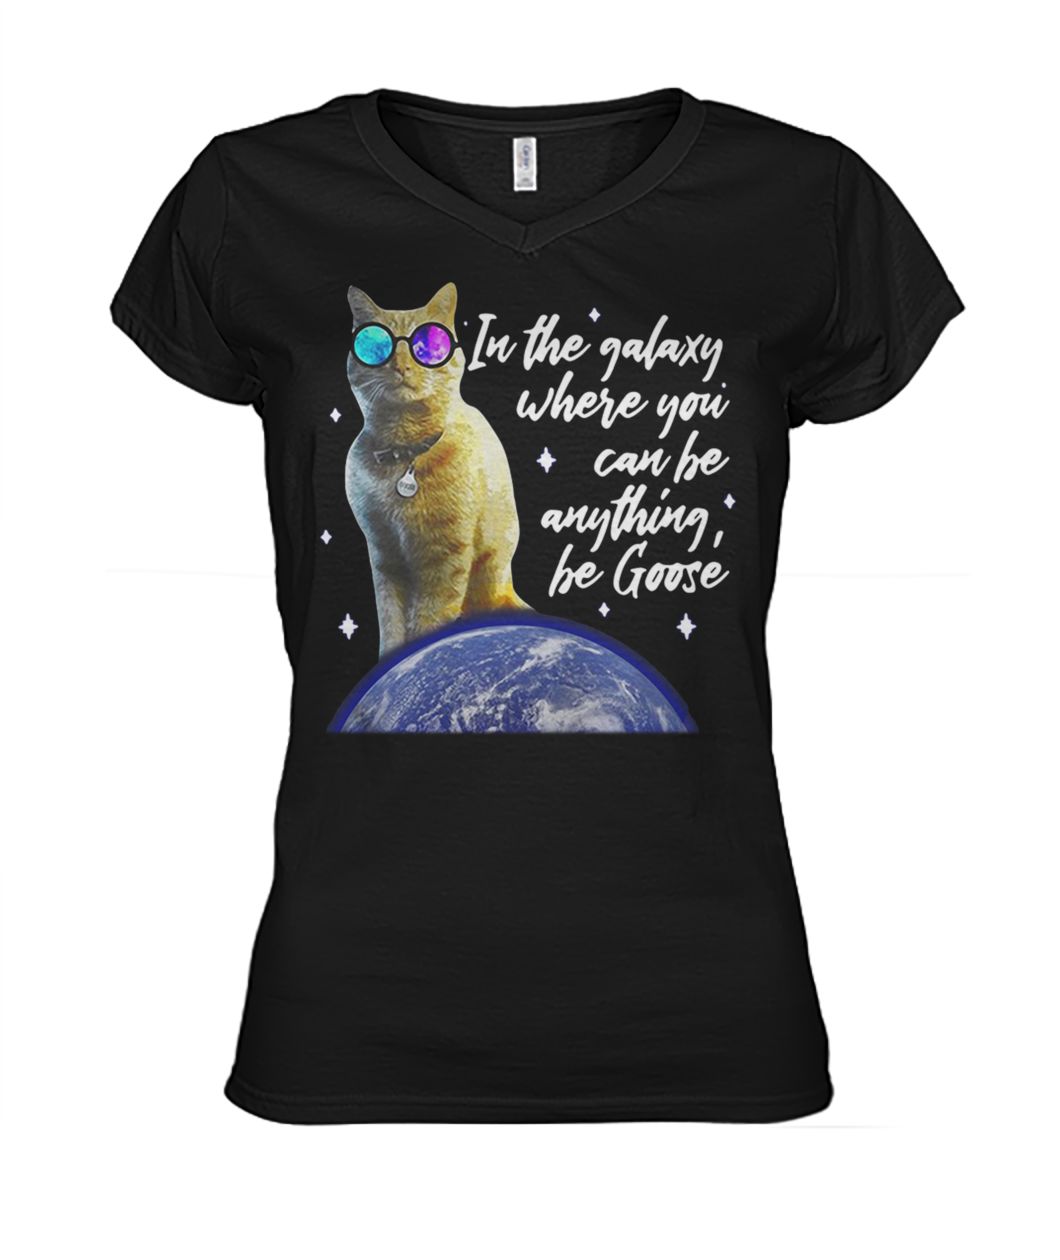 Captain marvel goose the cat in a galaxy where you can be anything be goose women's v-neck